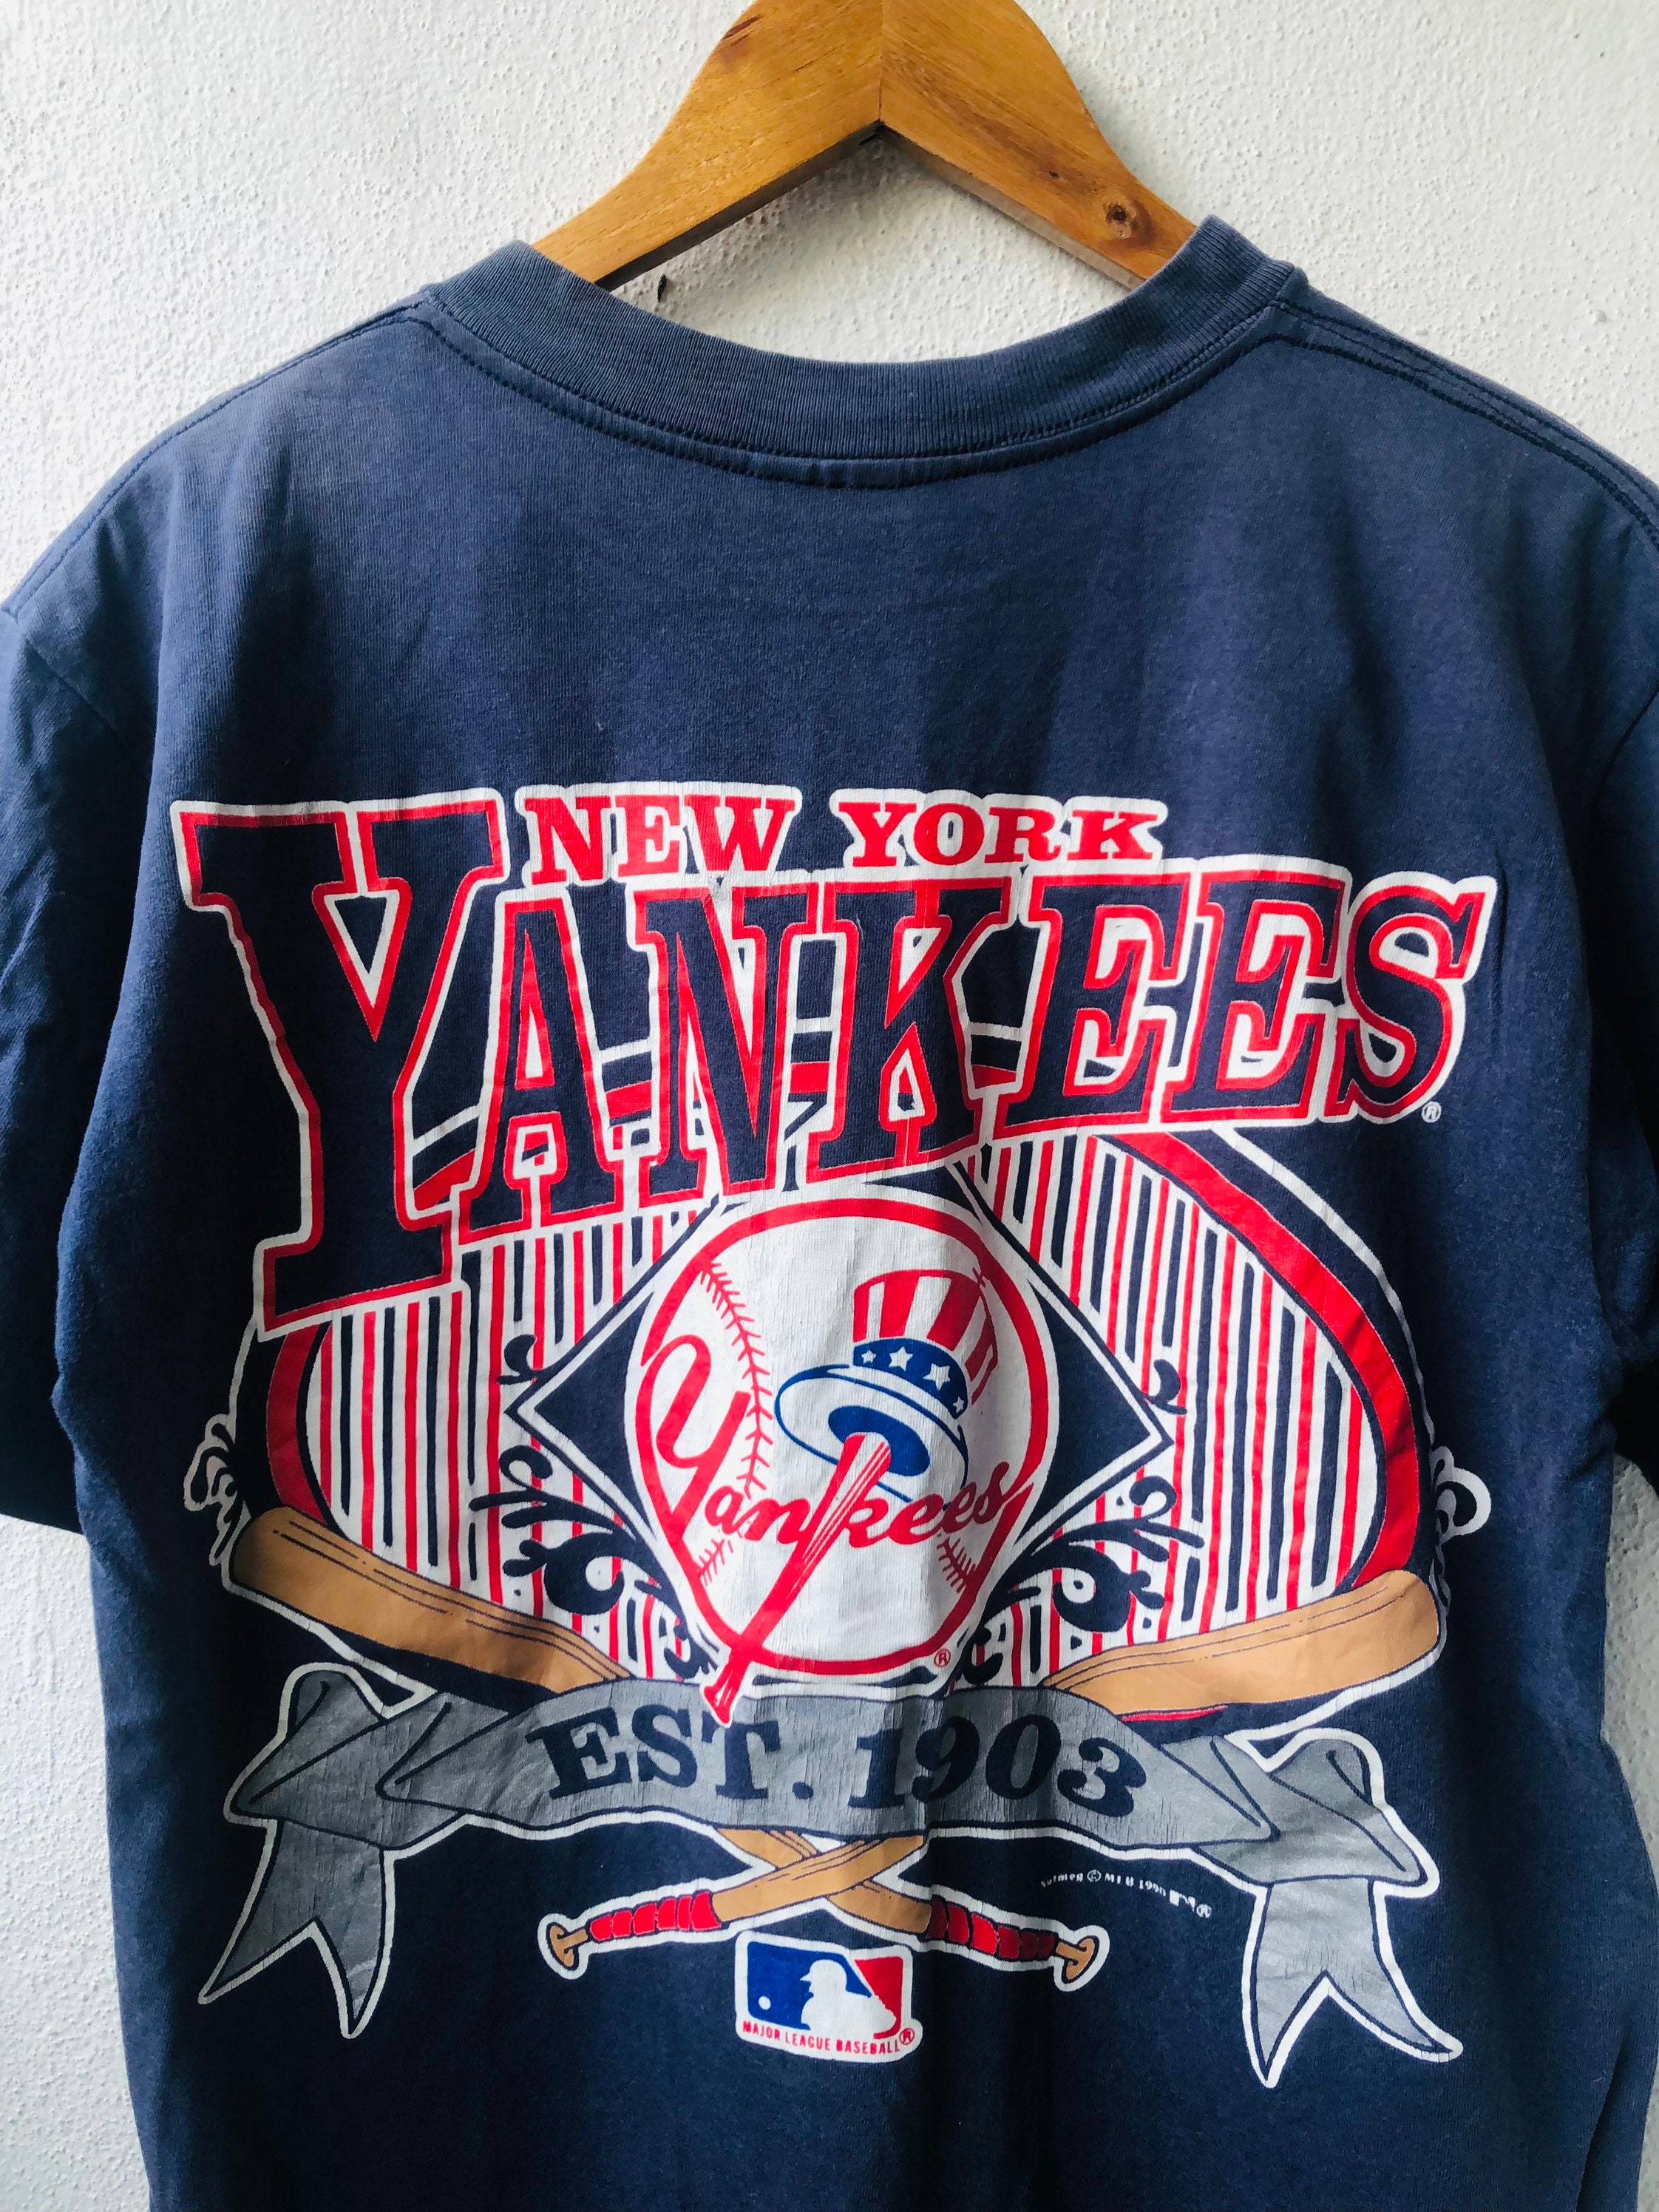 New York Yankees Vintage Graphic T-Shirt (Rare One of A Kind)